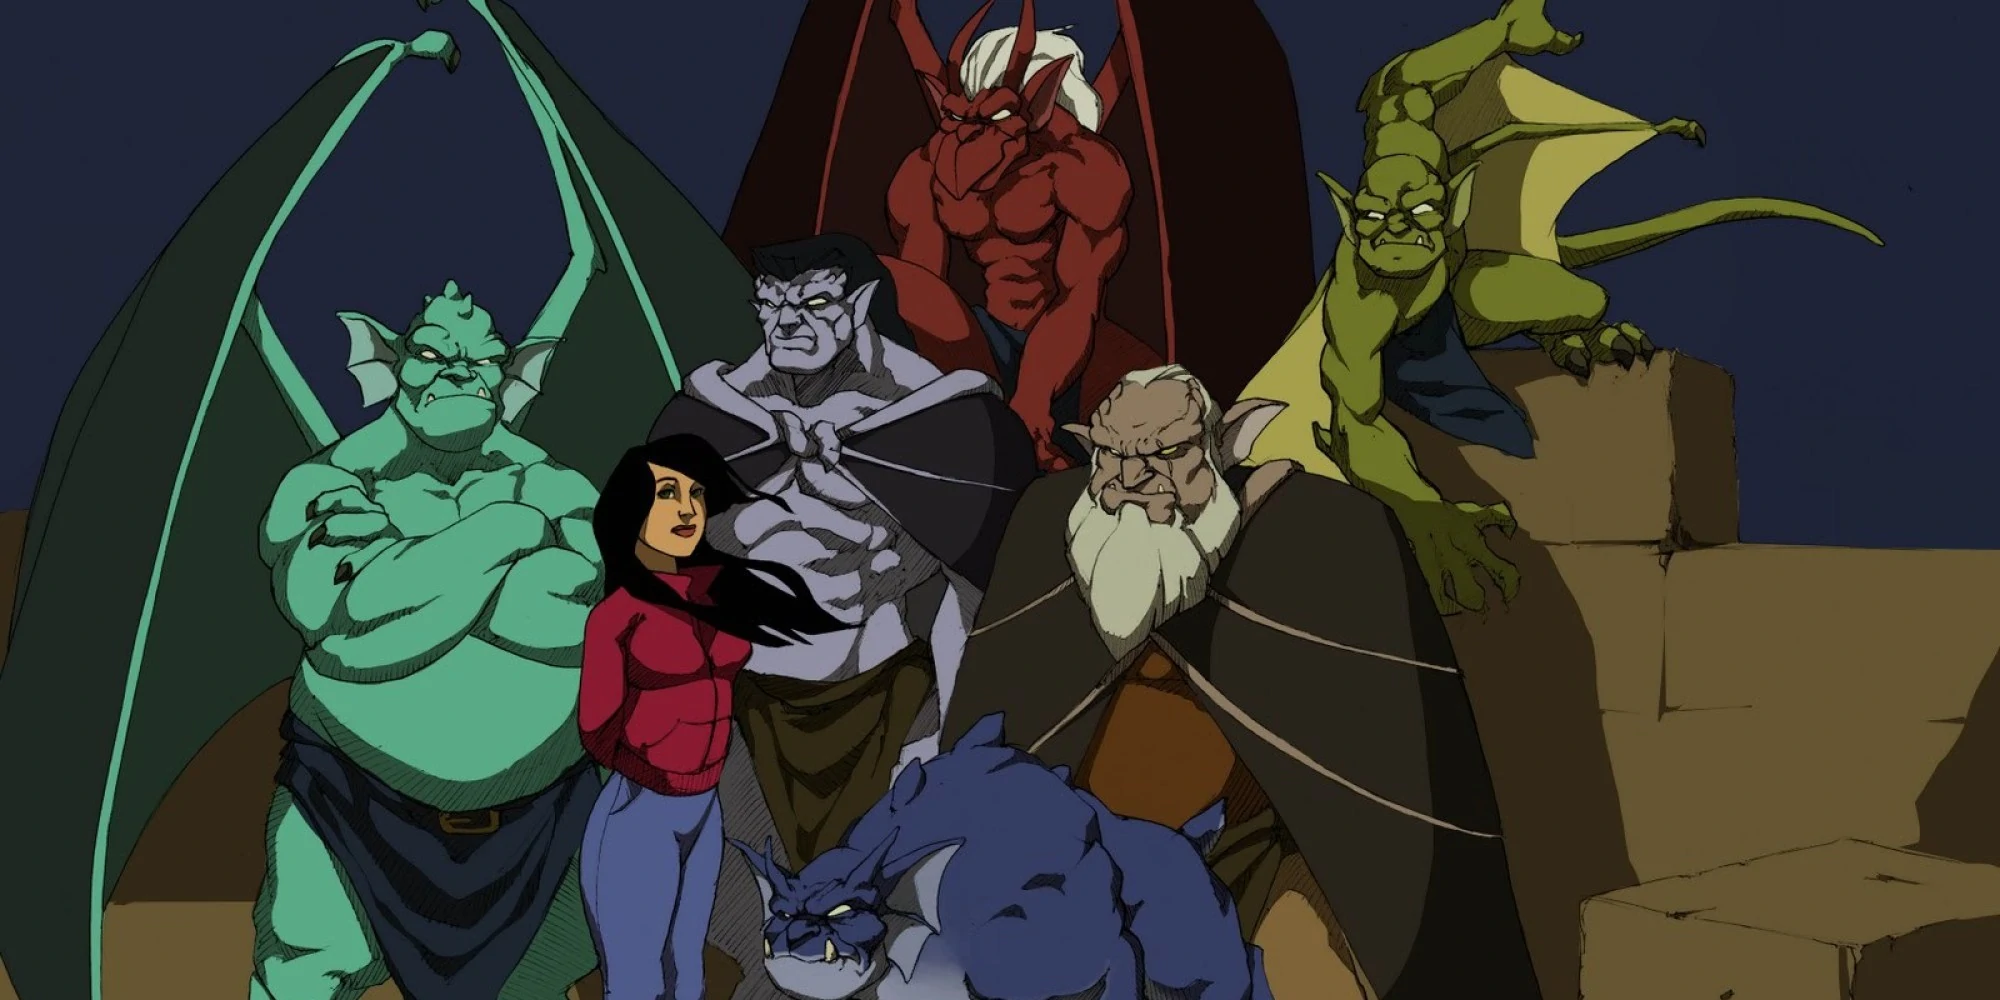 What The Gargoyles (1994) Cartoon Television Series Is All About